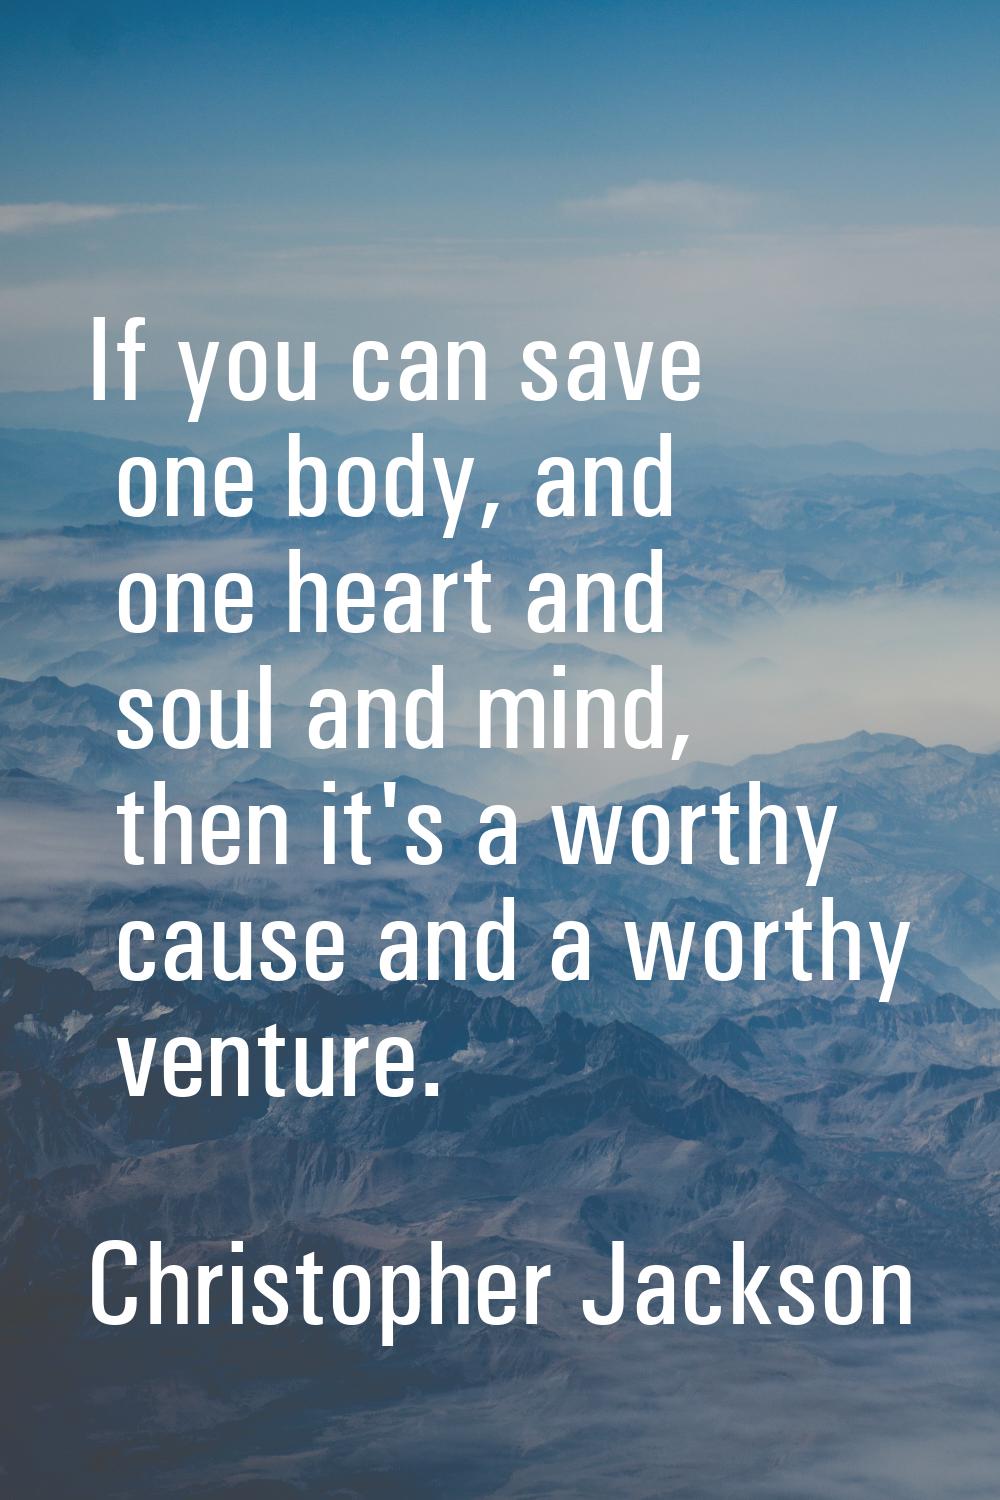 If you can save one body, and one heart and soul and mind, then it's a worthy cause and a worthy ve